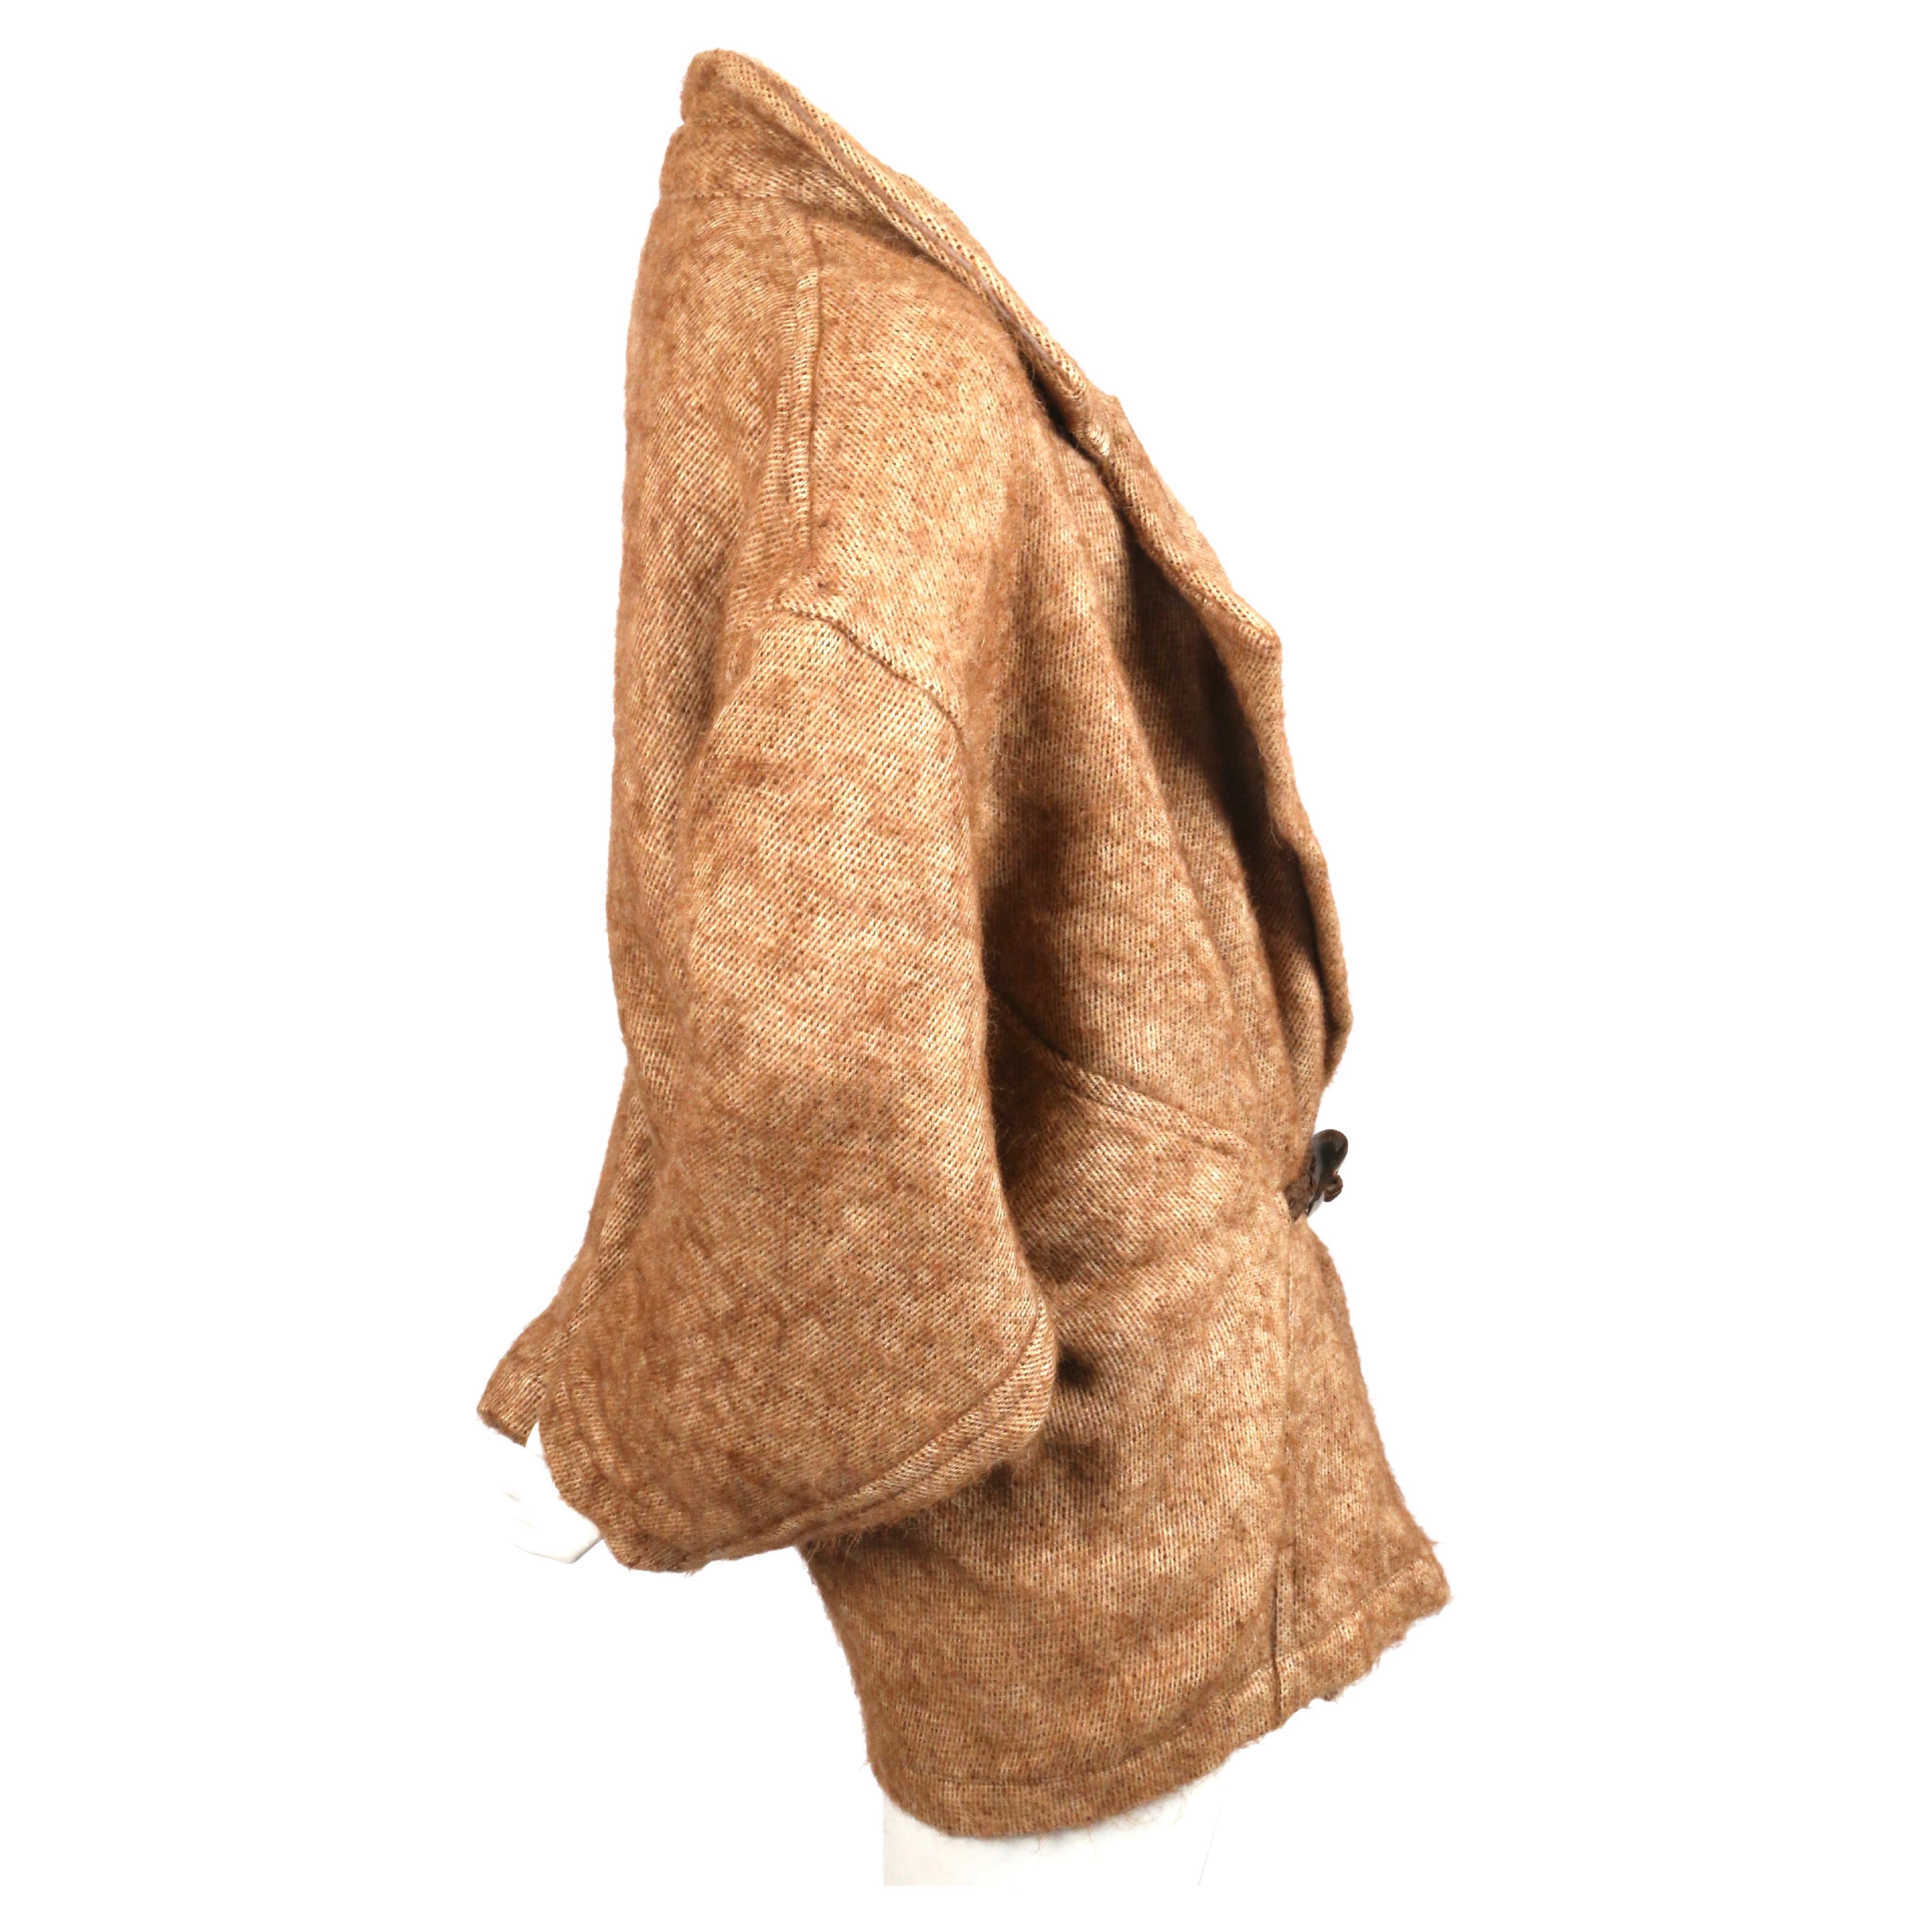 Brown alpaca and linen coat with leather and horn toggle closure designed by Issey Miyake dating to the 1984 as seen on the runway. Has a beautiful draped fit around the high hip area. Japanese size S. Approximate measurements: shoulder 24” , bust